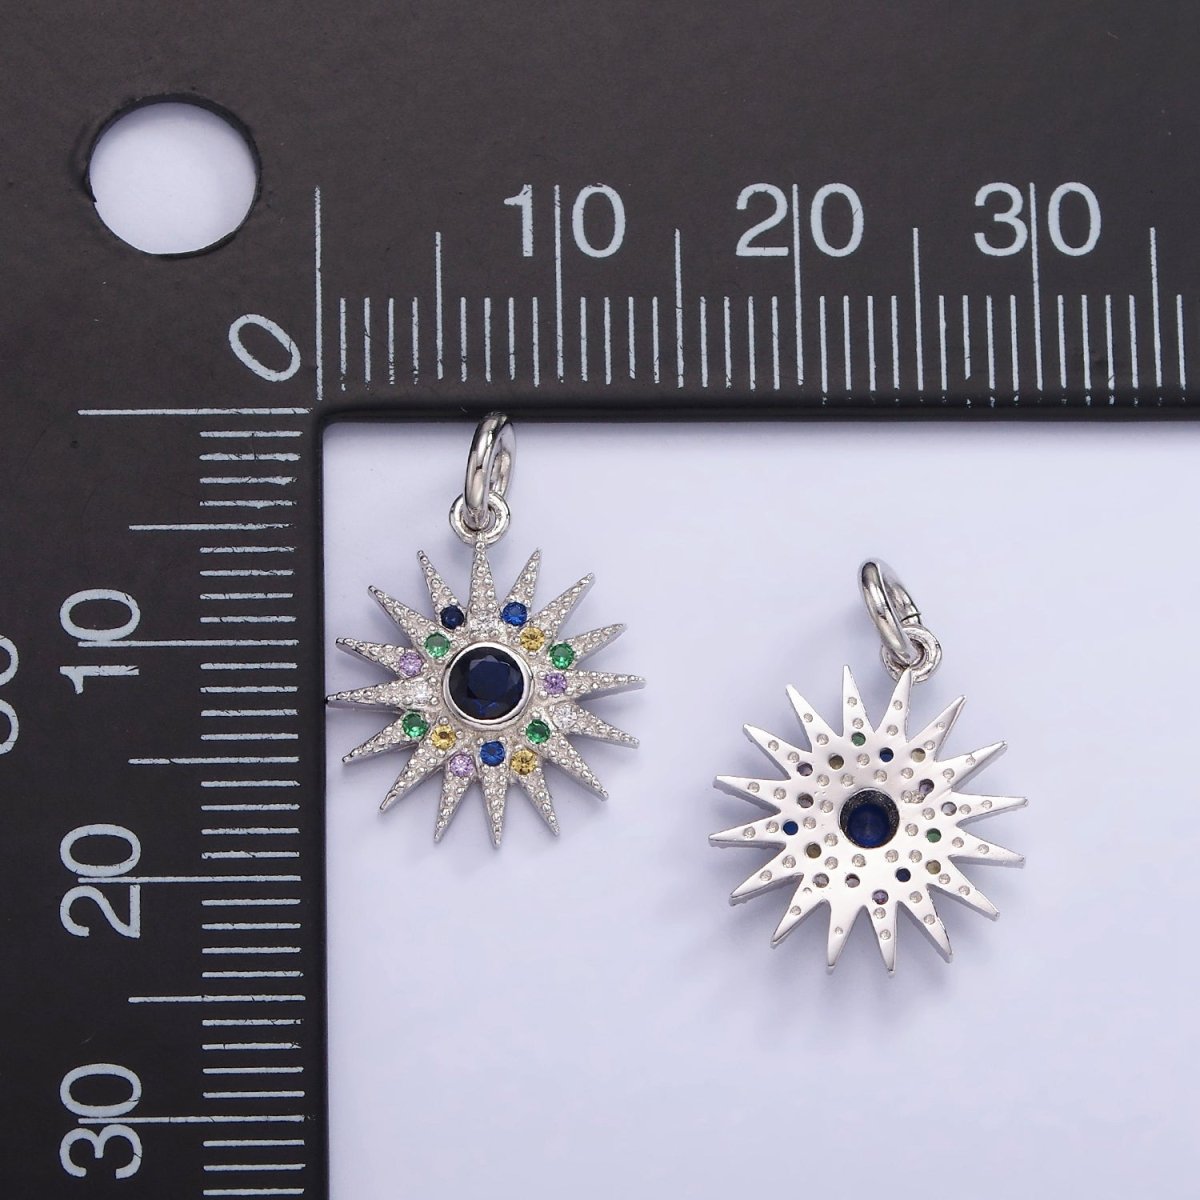 S925 Sterling Silver 13mm Sunburst Charm with Colorful Cz Stone | SL-480 - DLUXCA